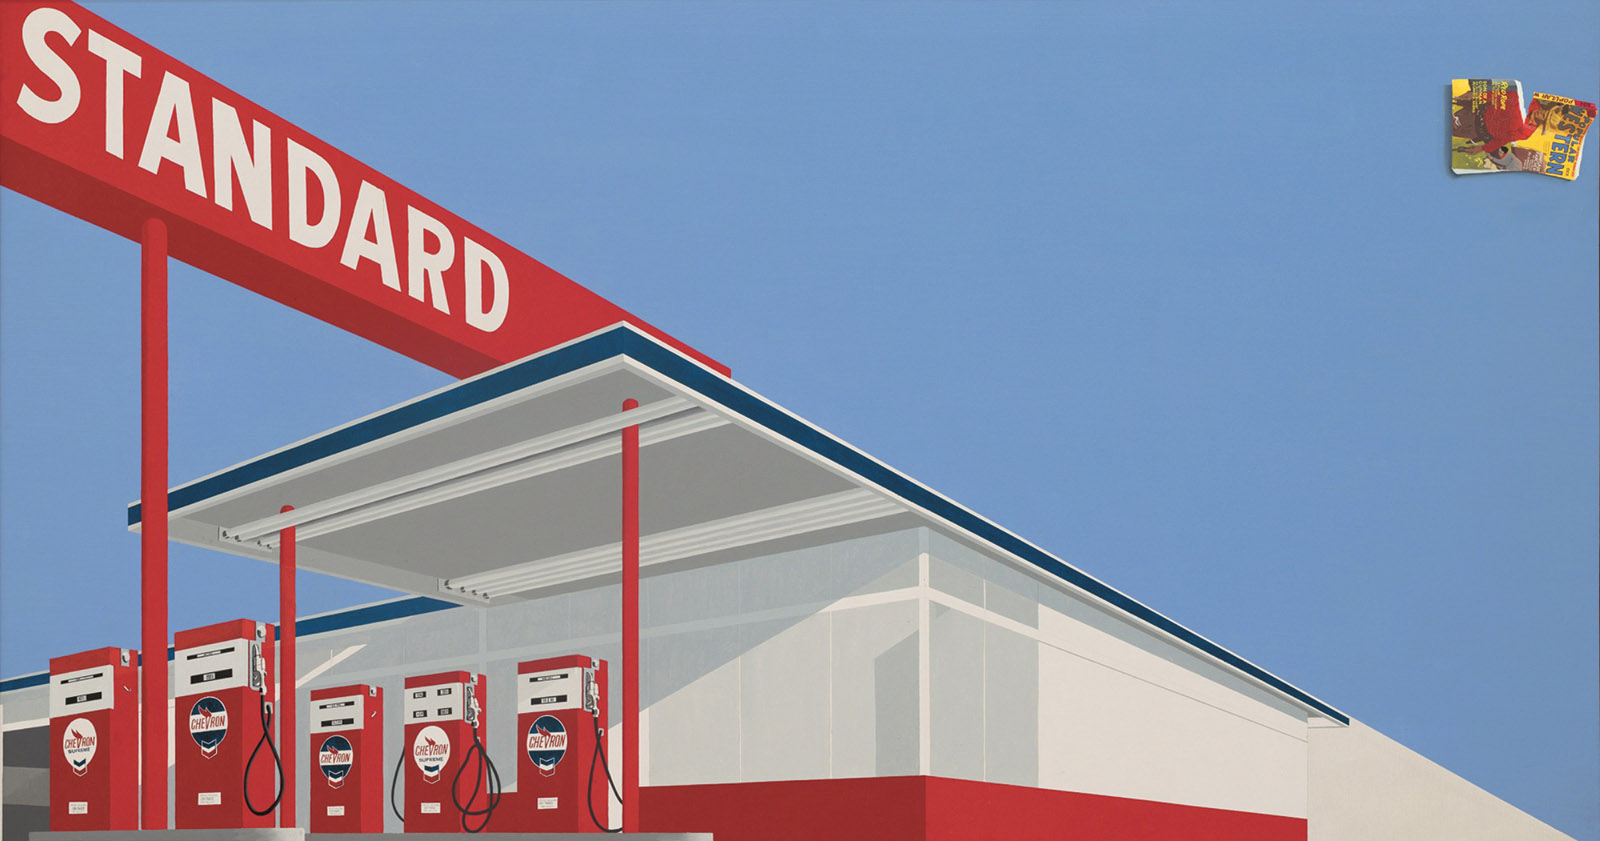 Standard Station, Ten-Cent Western Being Torn in Half; painting by Ed Ruscha